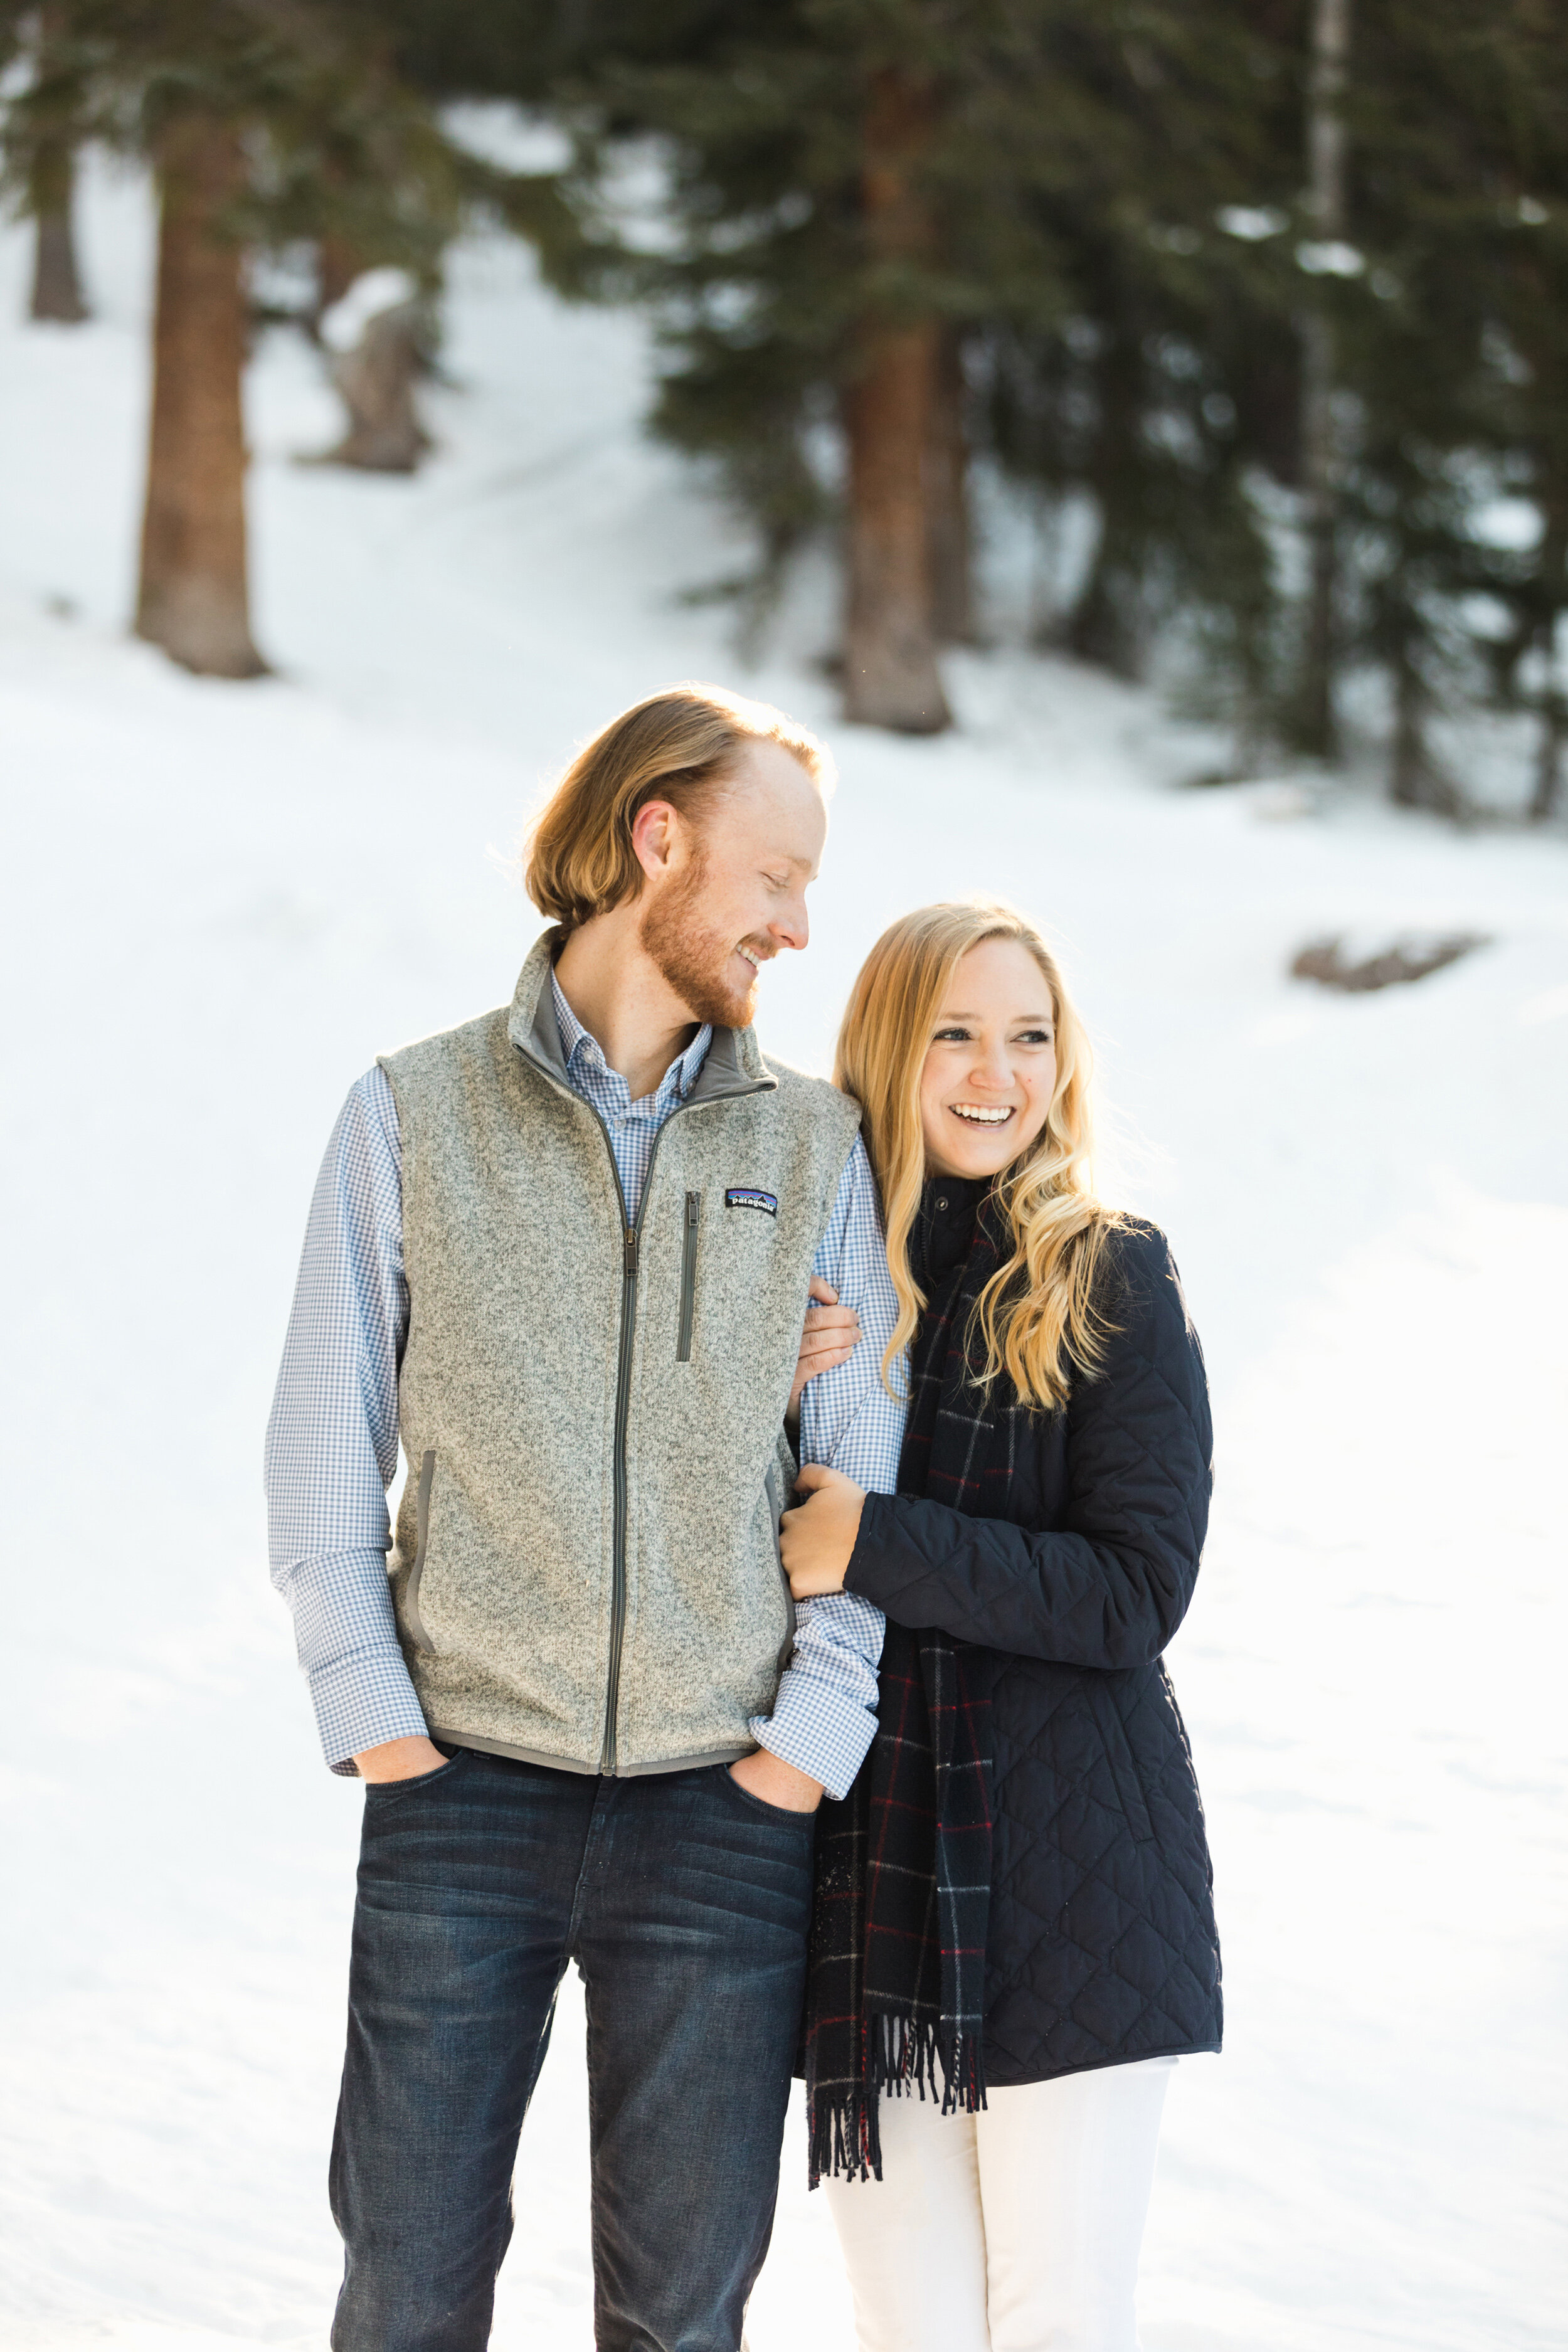 snowy-colorado-engagement-photos-in-the-forest-by-jackie-cooper-photo-12.jpg